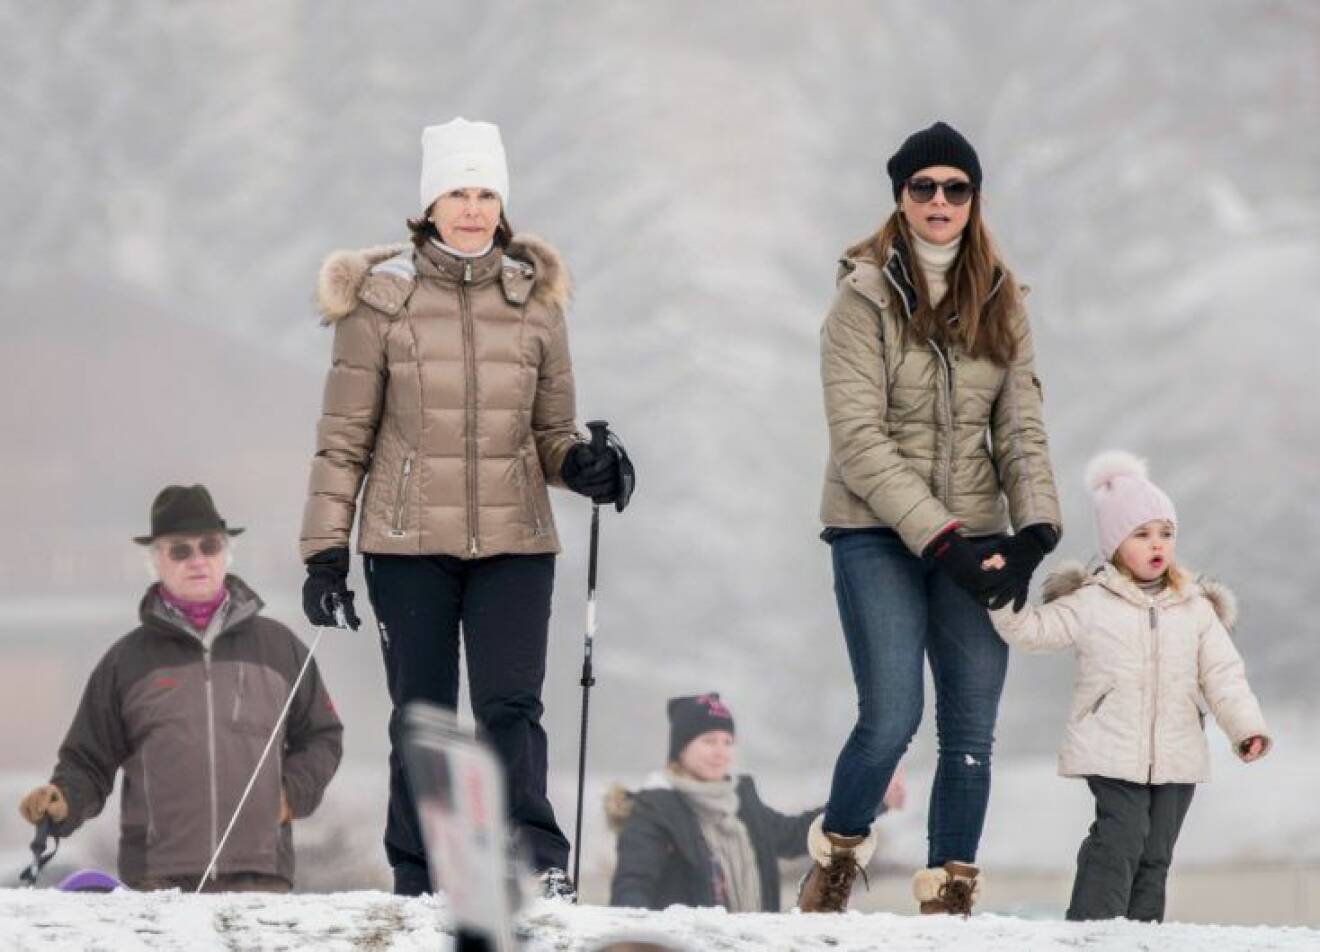 EXCLUSIVE - NO CREDIT - The Royal Swedish family on ski vacation in Switzerland